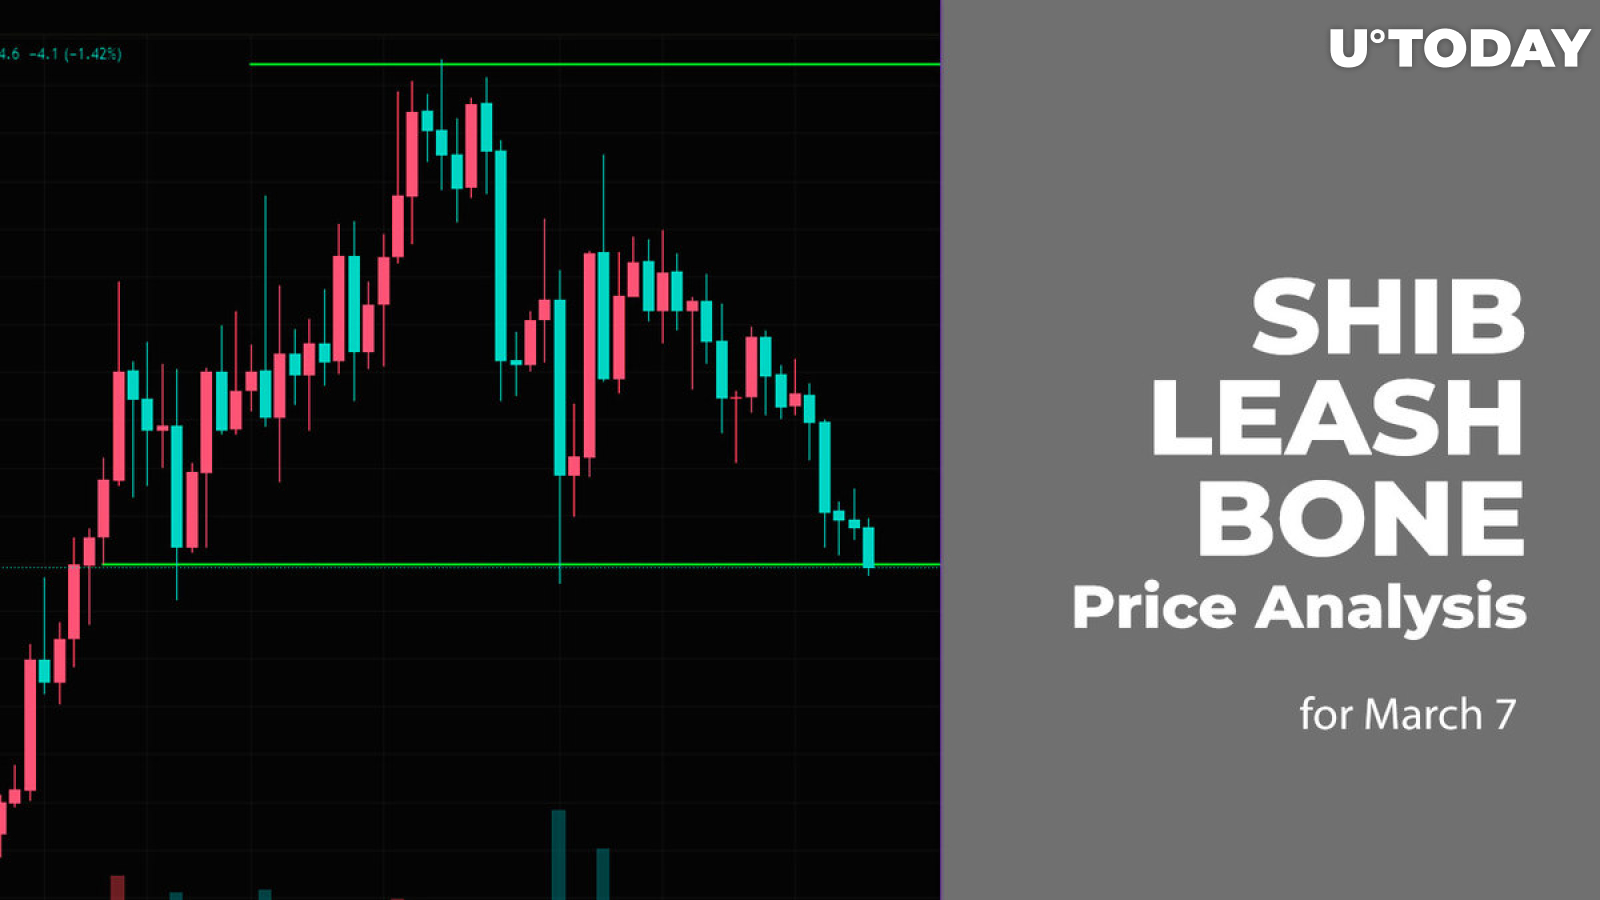 SHIB, LEASH and BONE Price Analysis for March 7